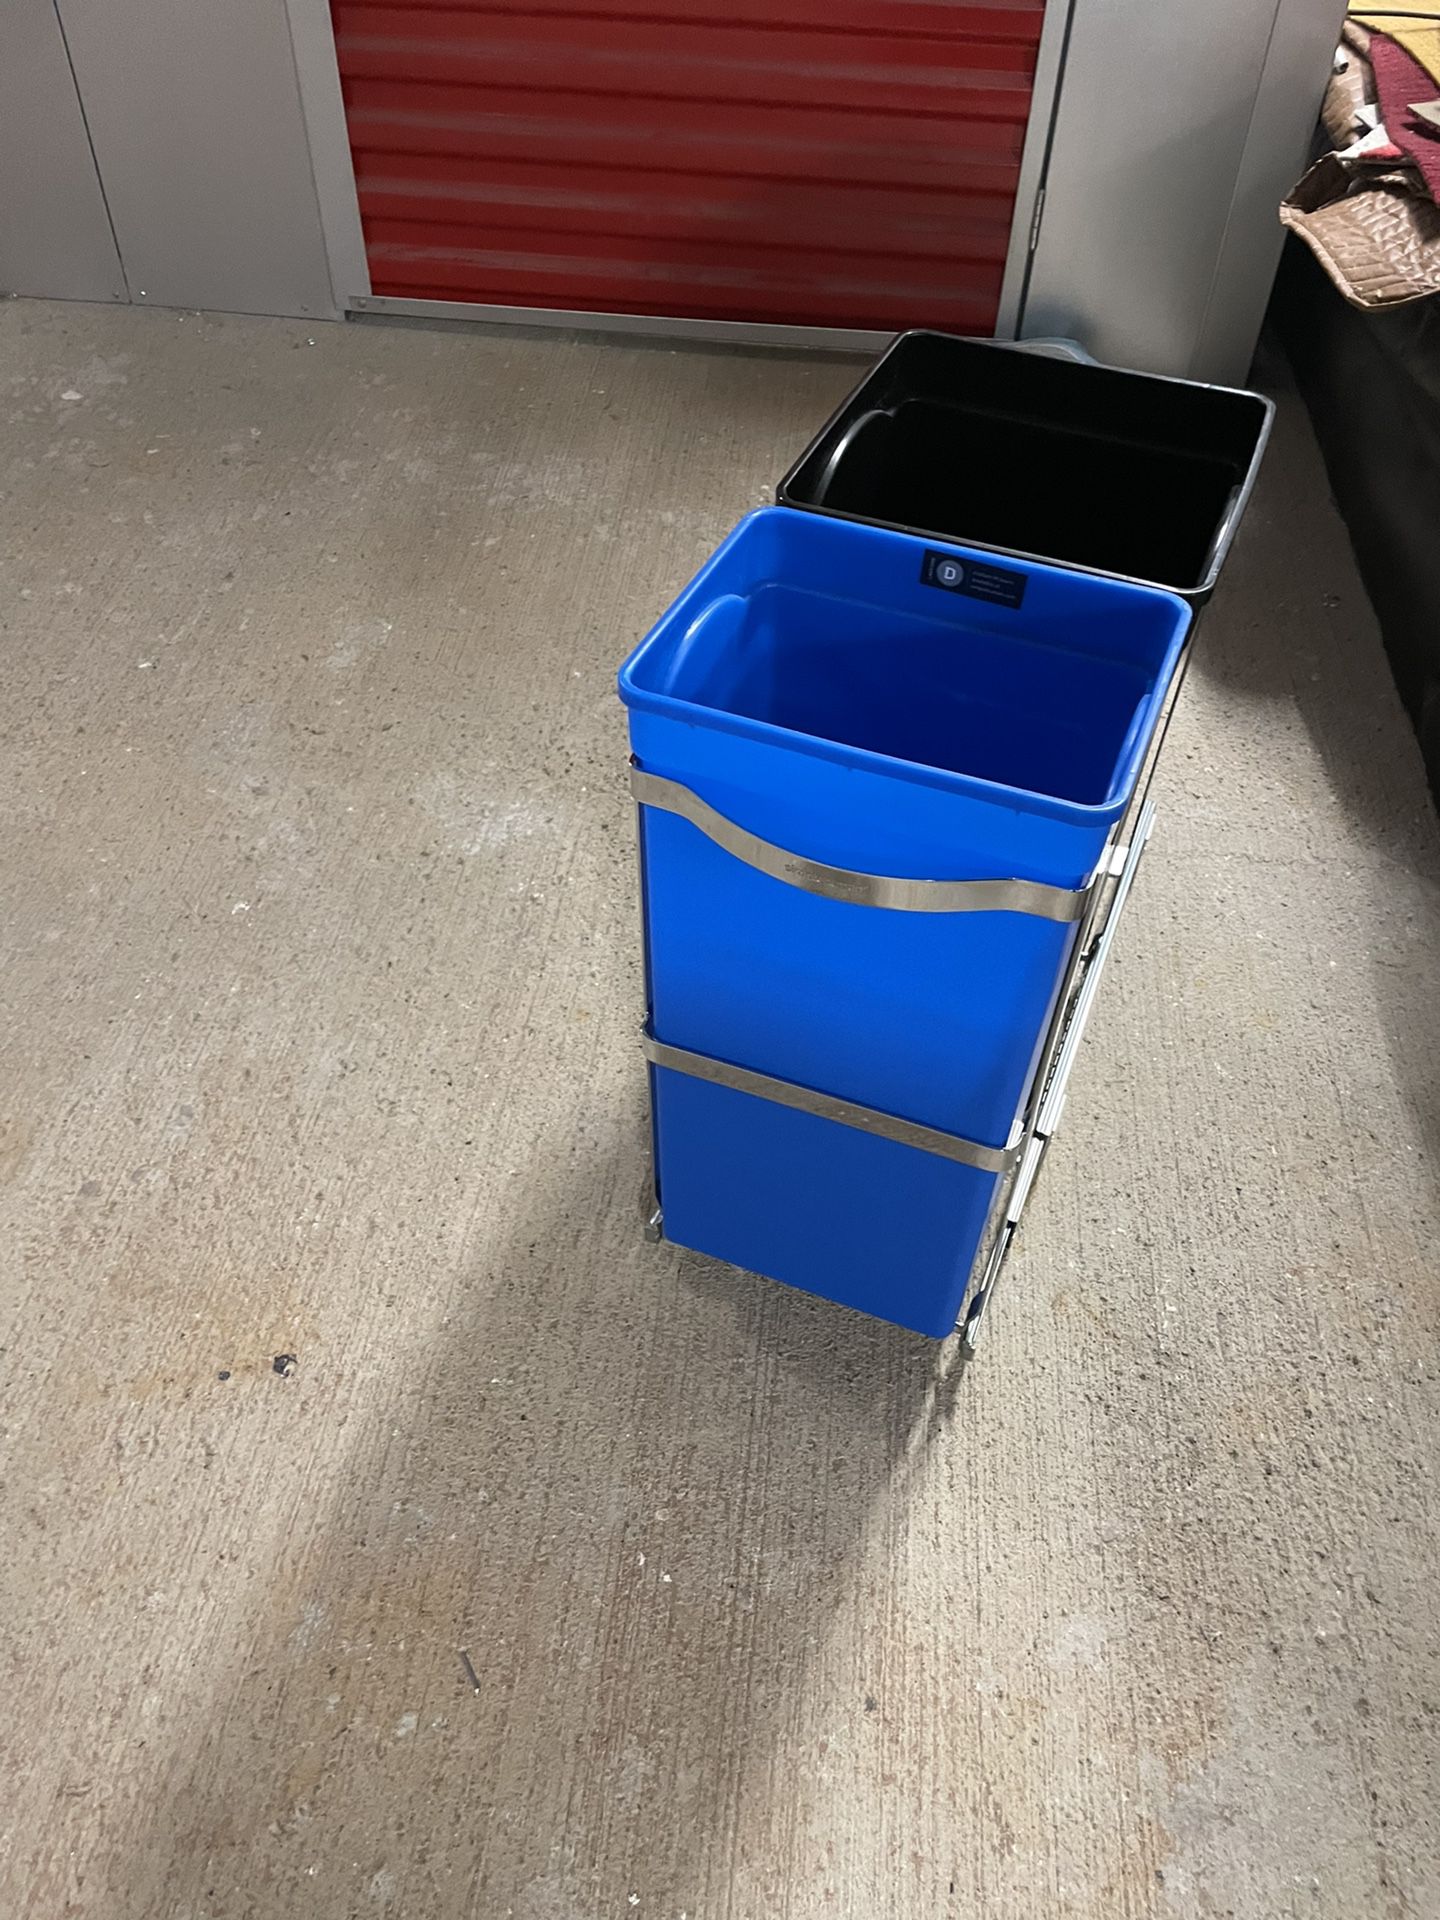 4 Trash can holders for under th sink. Slides out like a drawer.